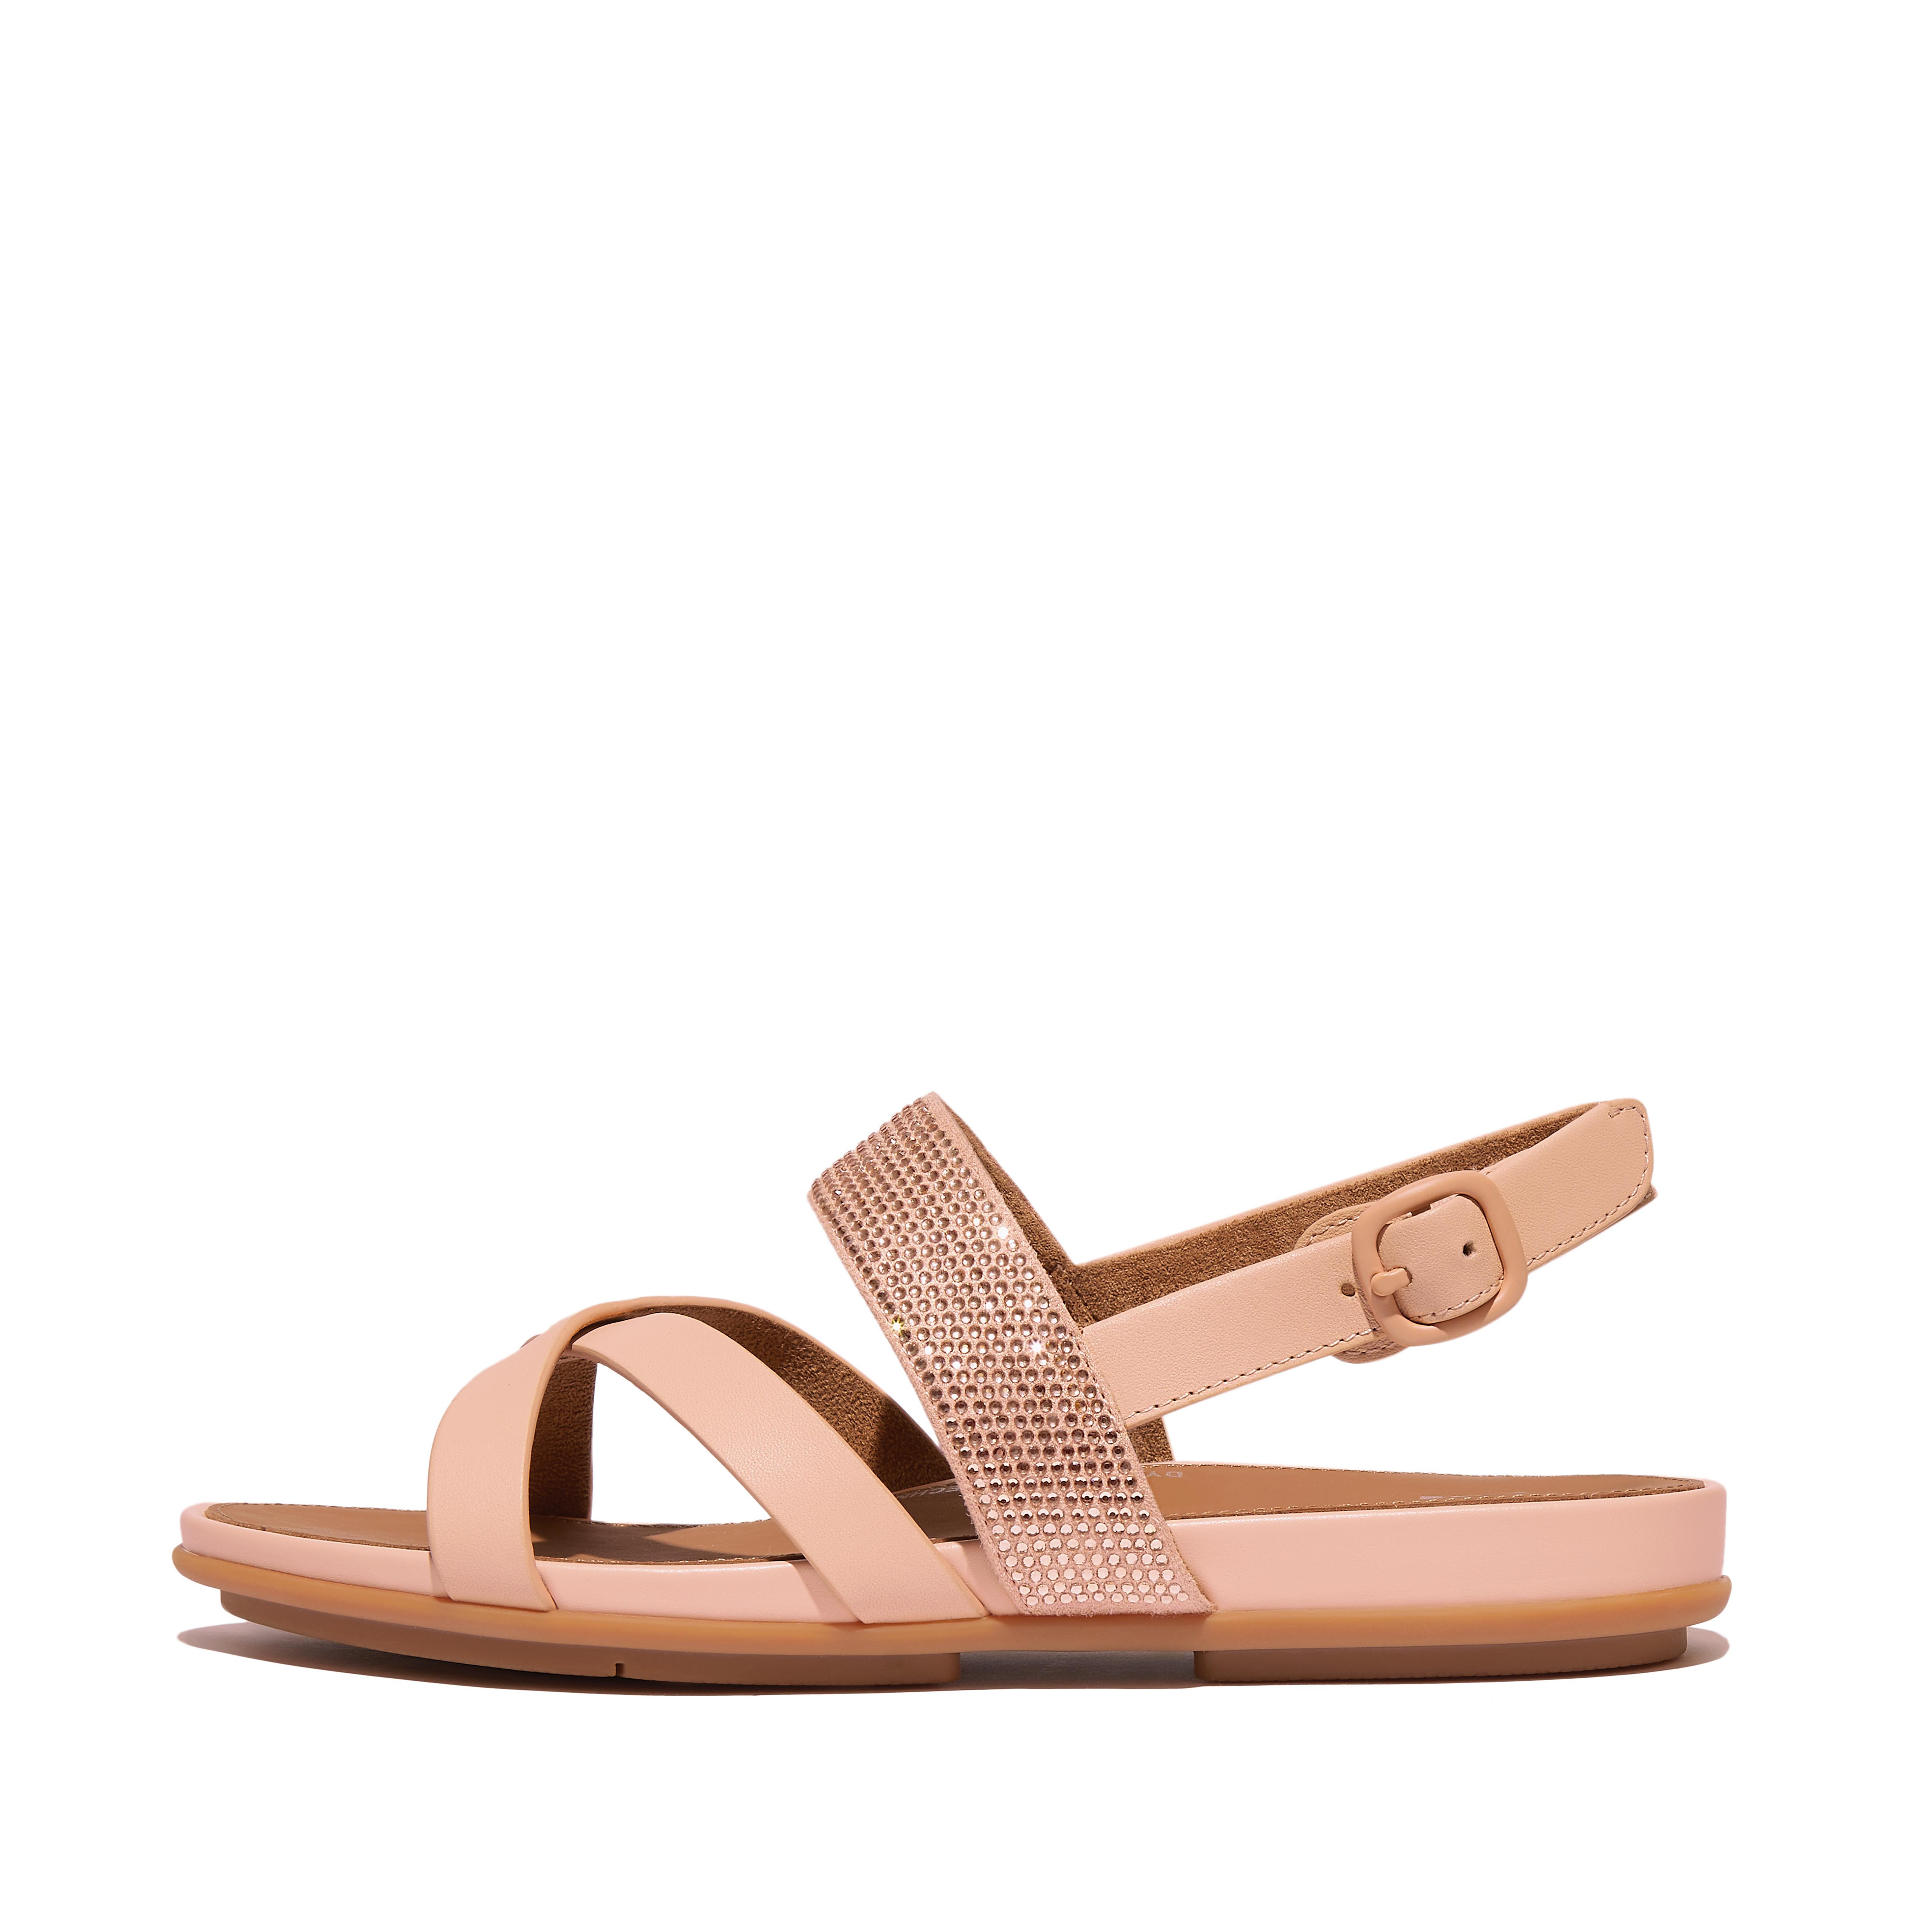 Fitflop Crystal Leather Strappy Back-Strap Sandals,Blushy